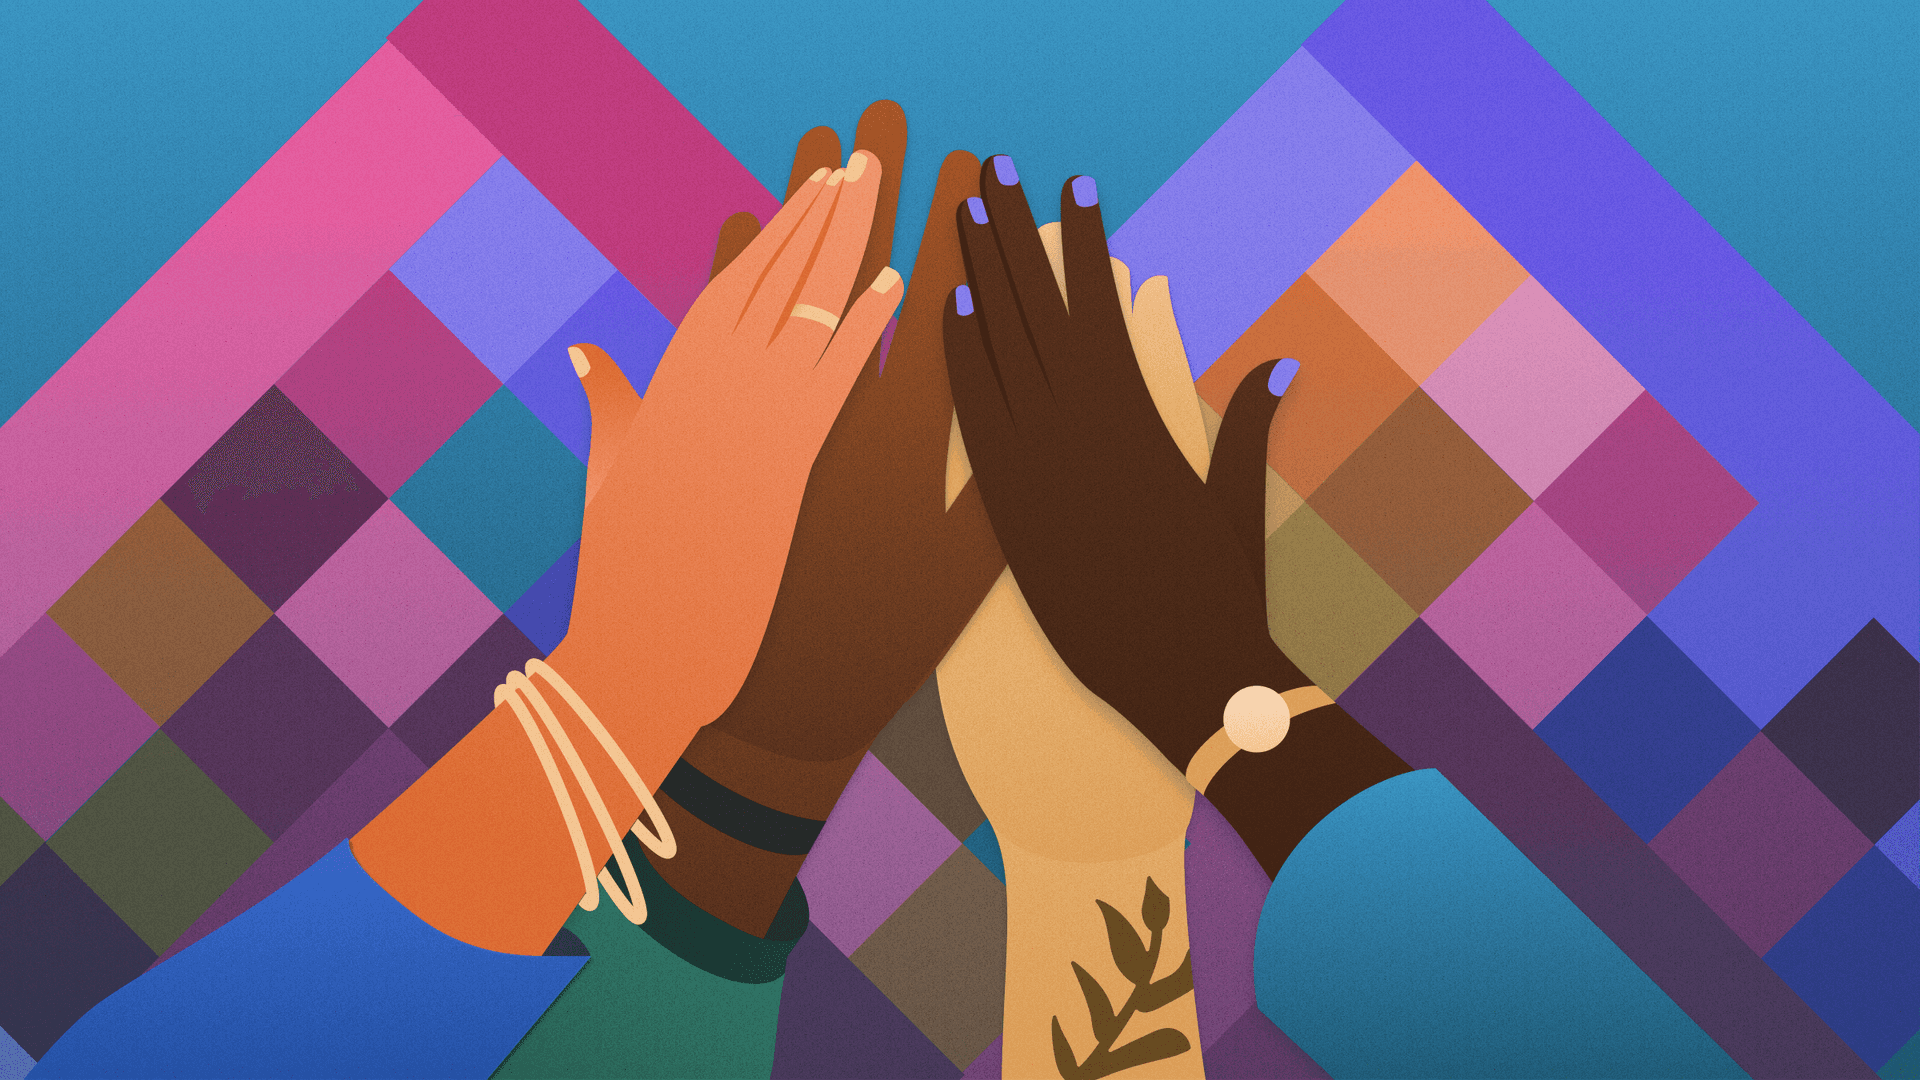 Hands of different skin tones high-five with colors from the Indeed palette in the background.